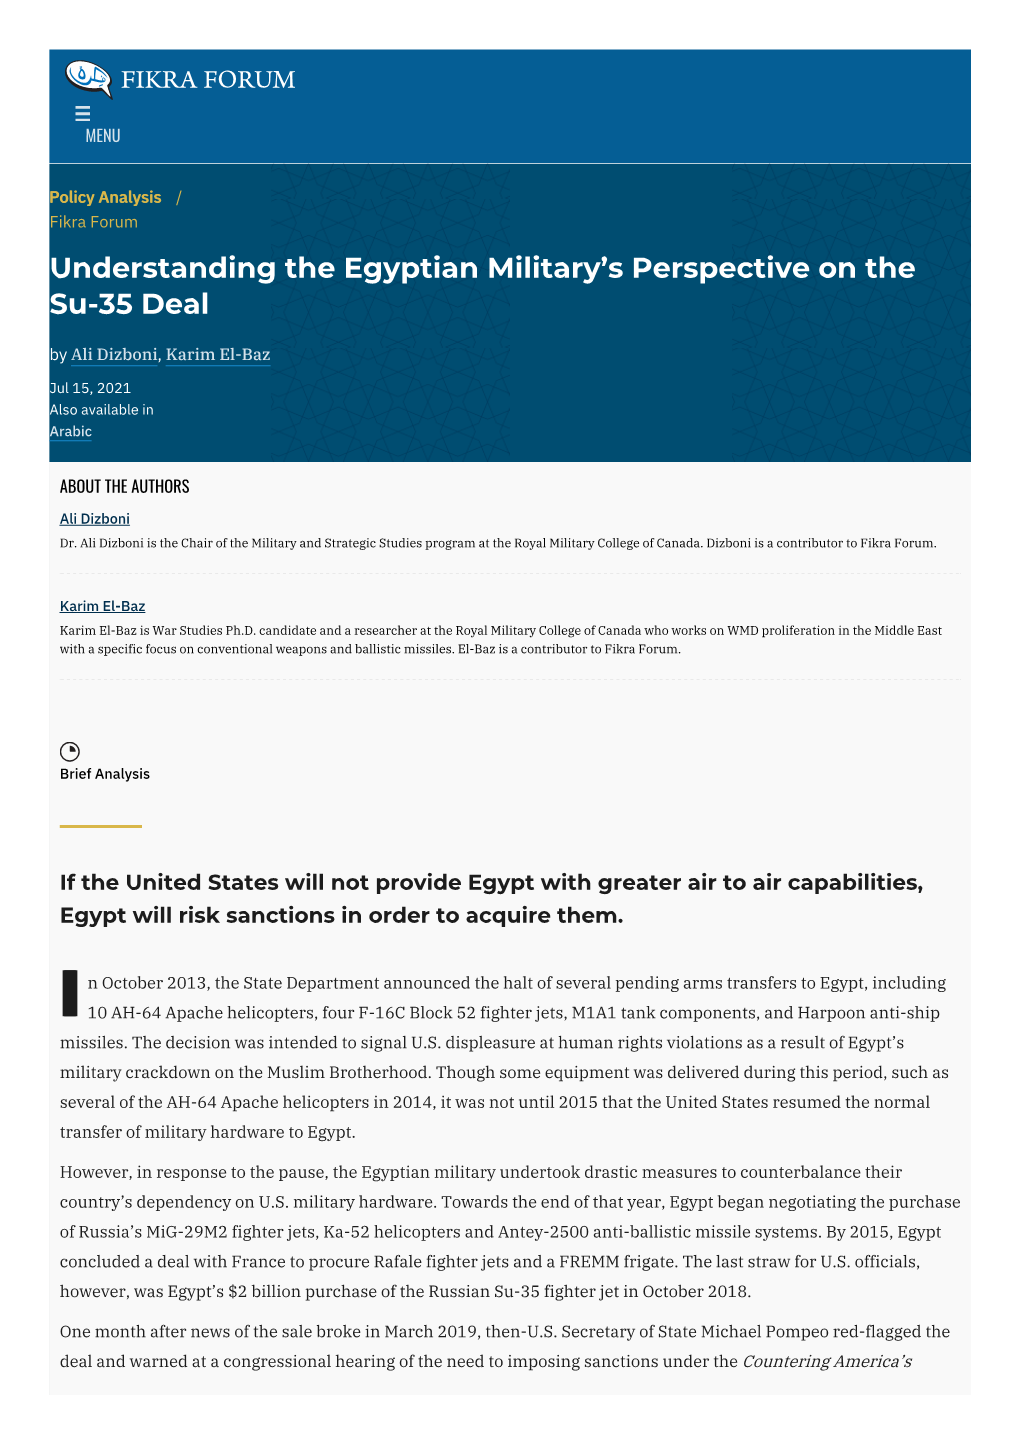 Understanding the Egyptian Military's